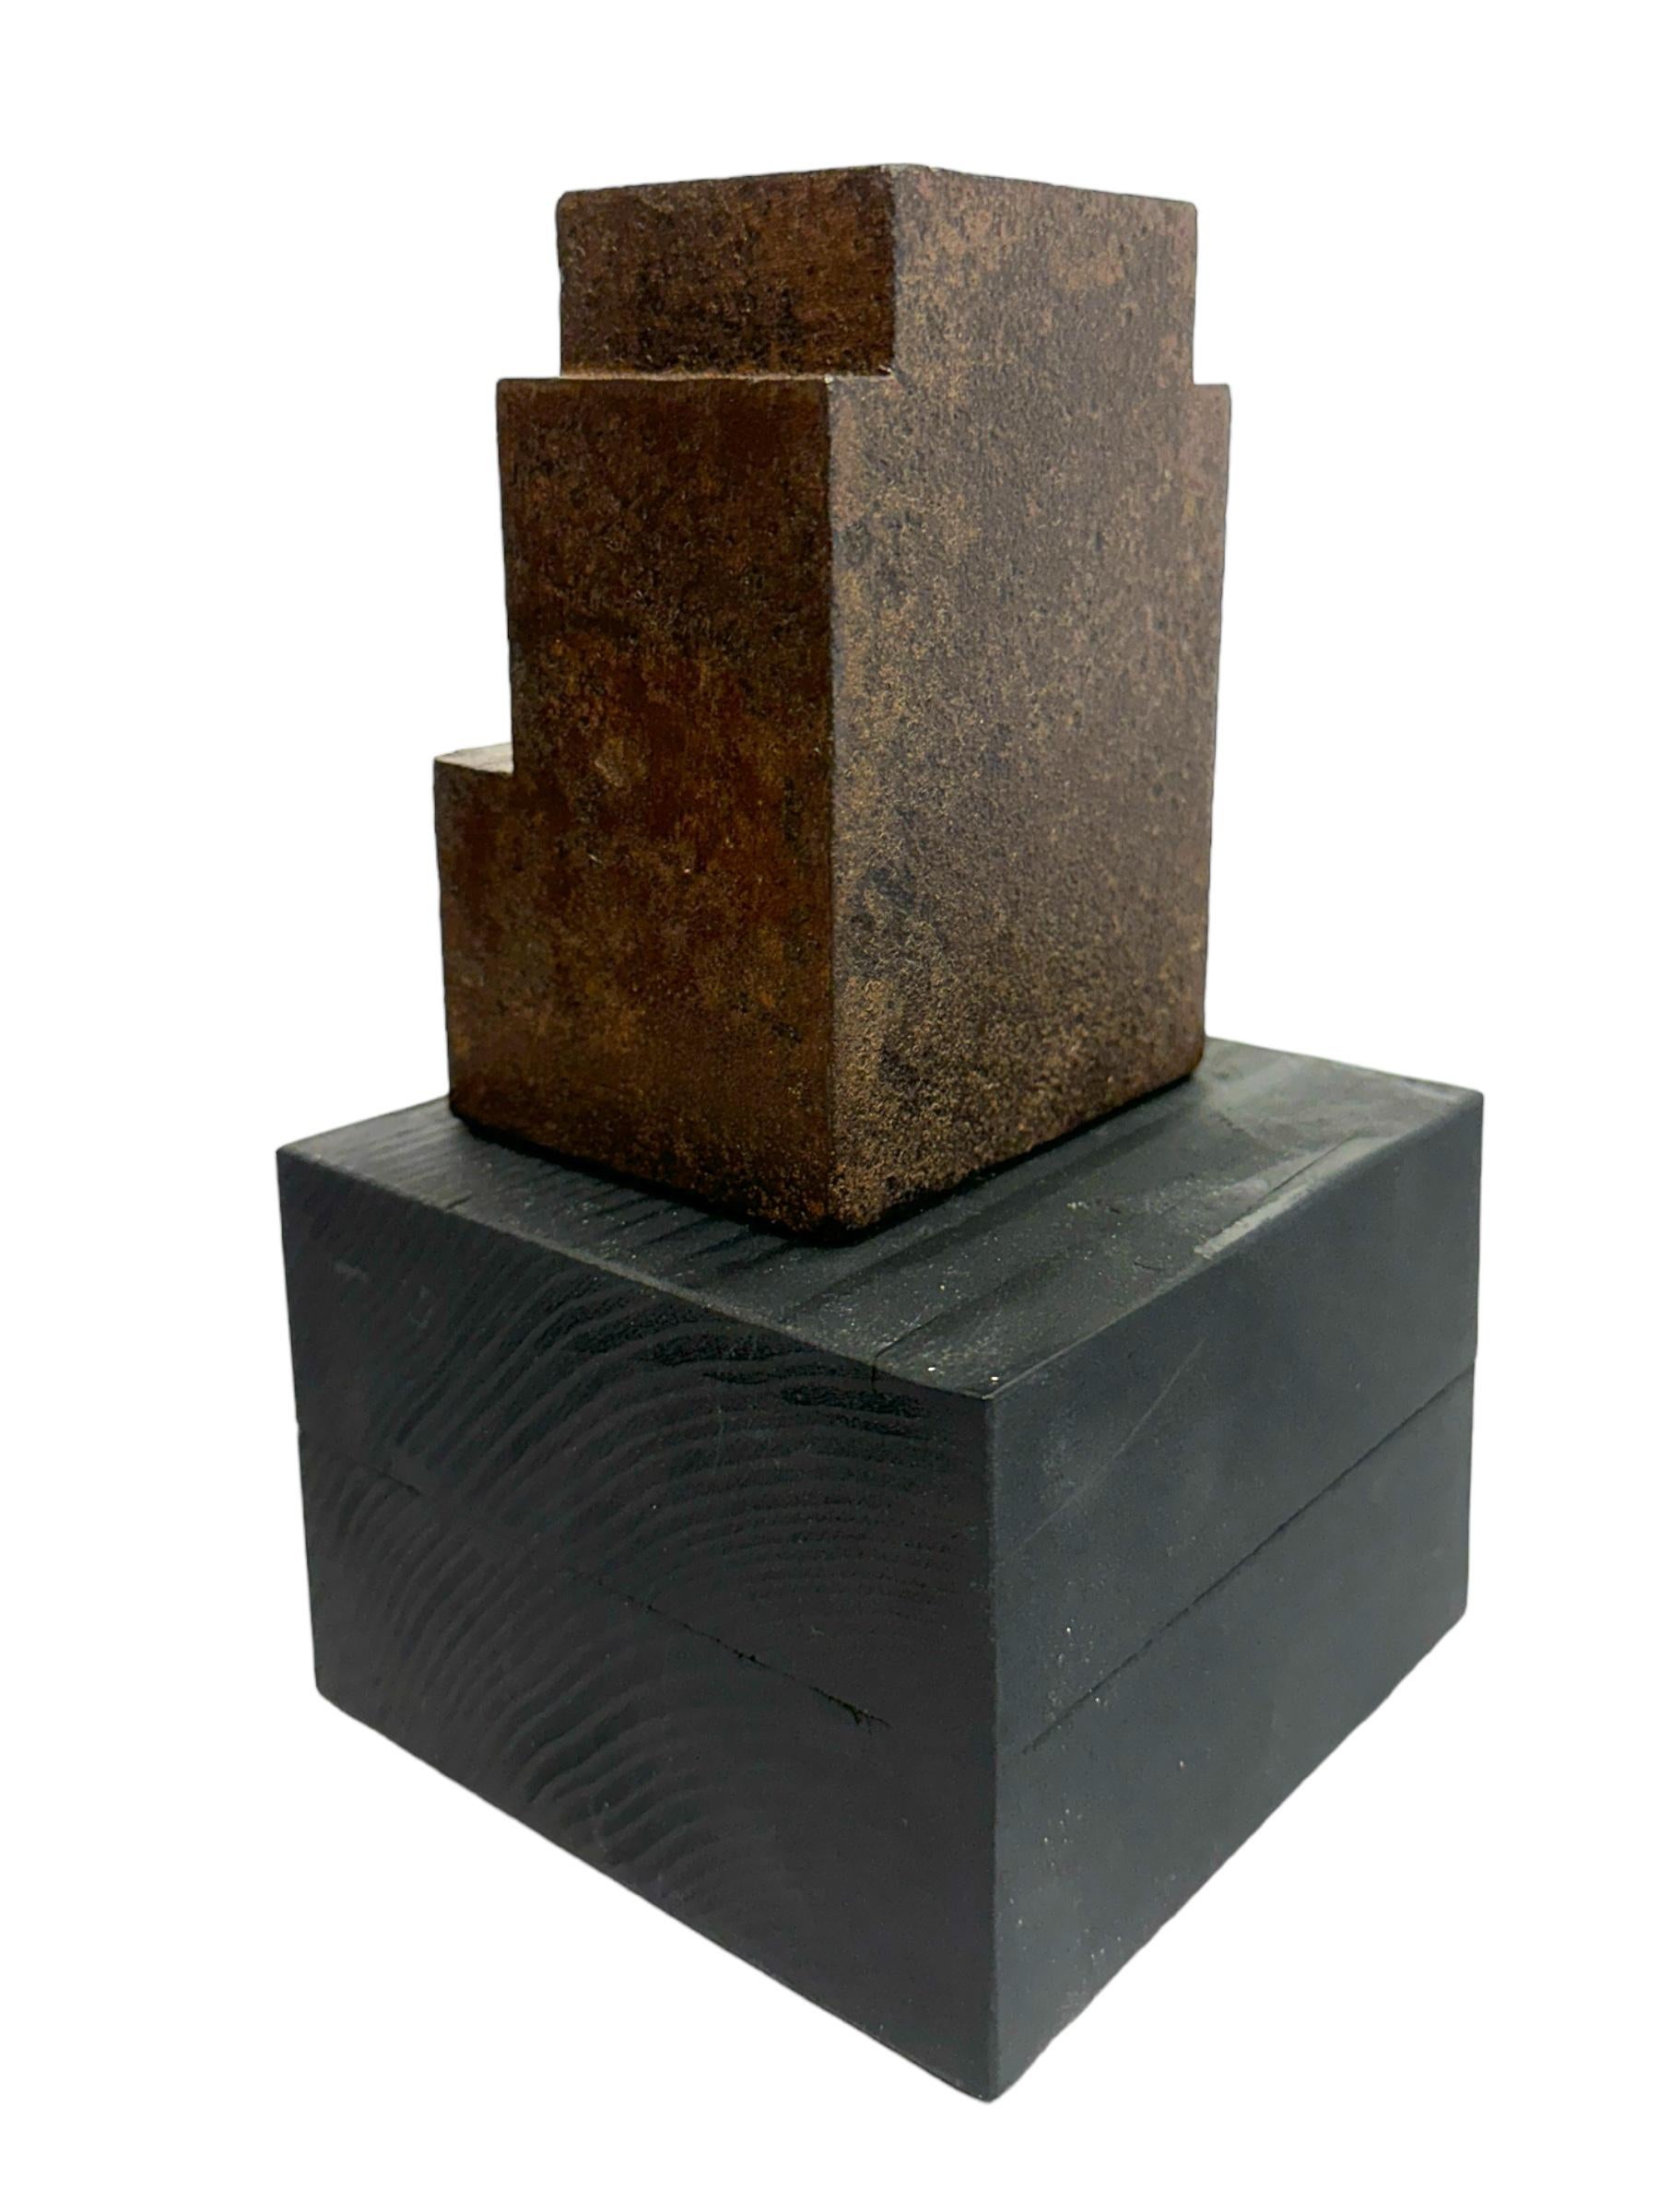 Welded Minimalist Modern Structure, Rusted Steel on Wood Block Base For Sale